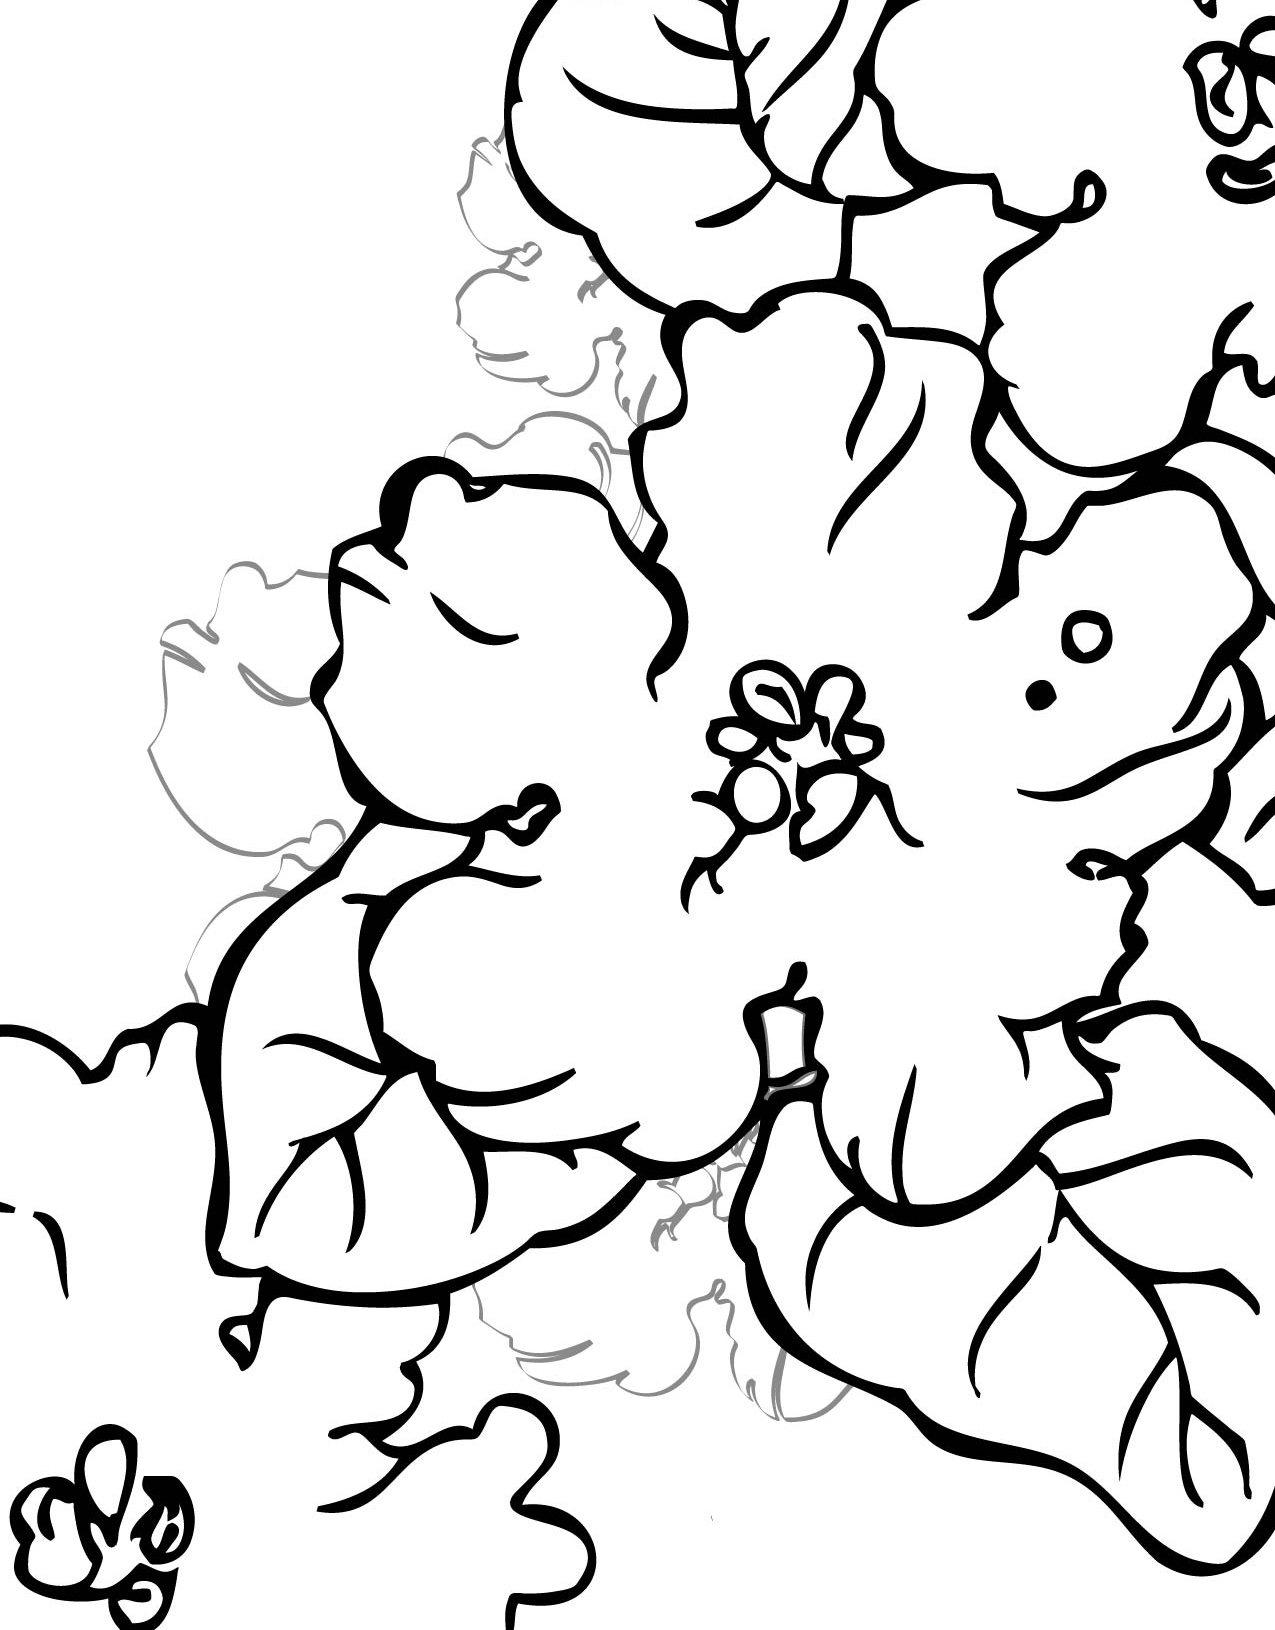 Violet Flowers Coloring Page